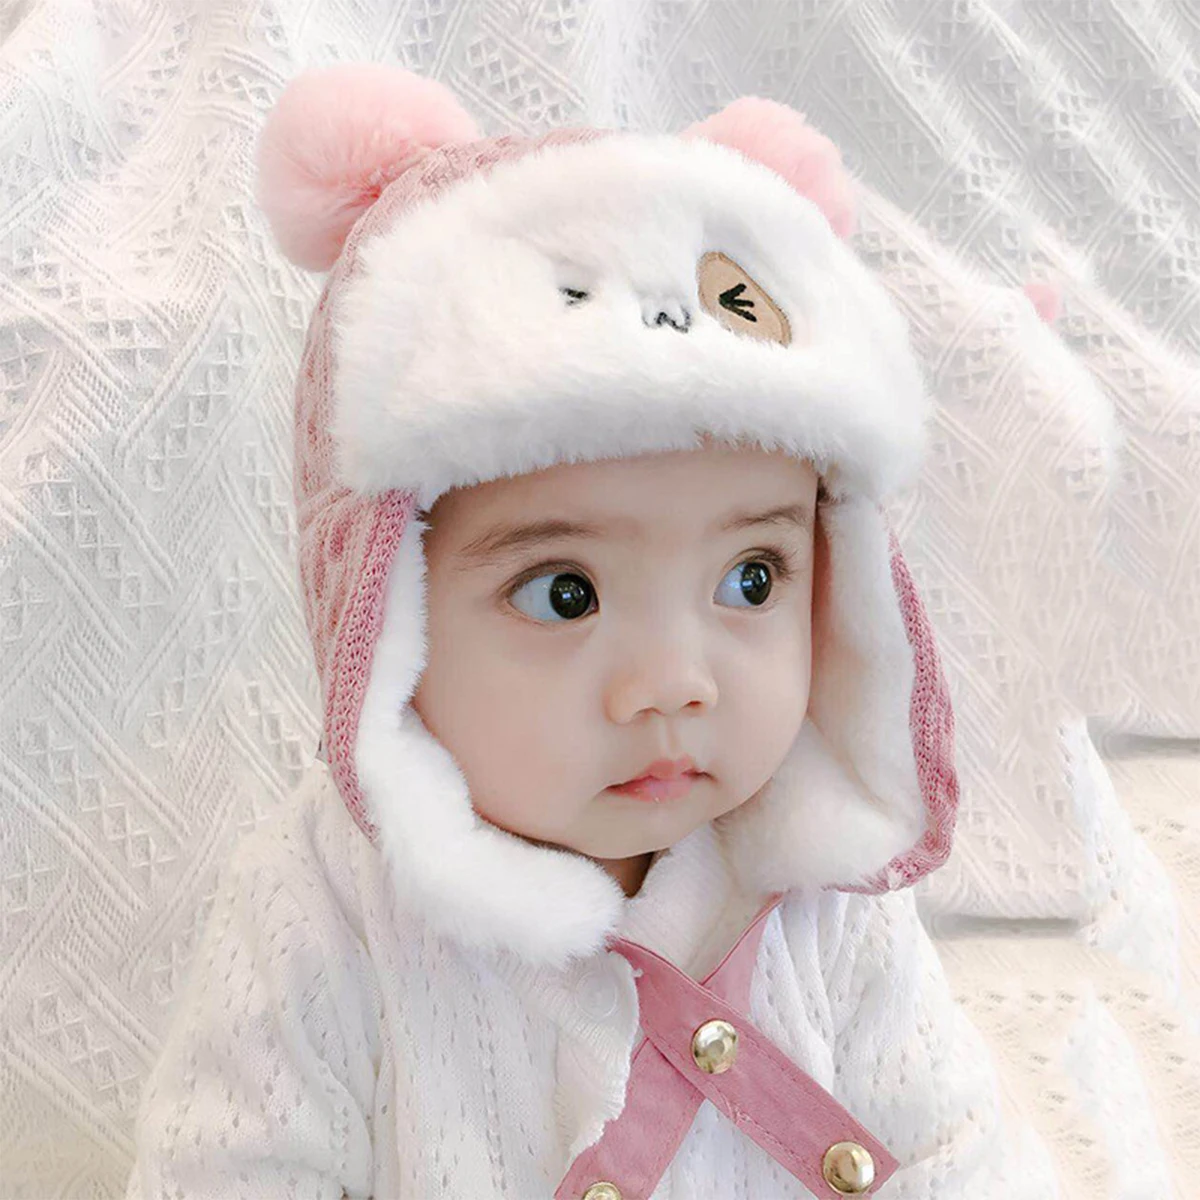 Autumn Winter Warm Knitted Wool Beanie Hat for Girl Cute Baby Cap Hats with Braids Infant Headwear Kids Accessories